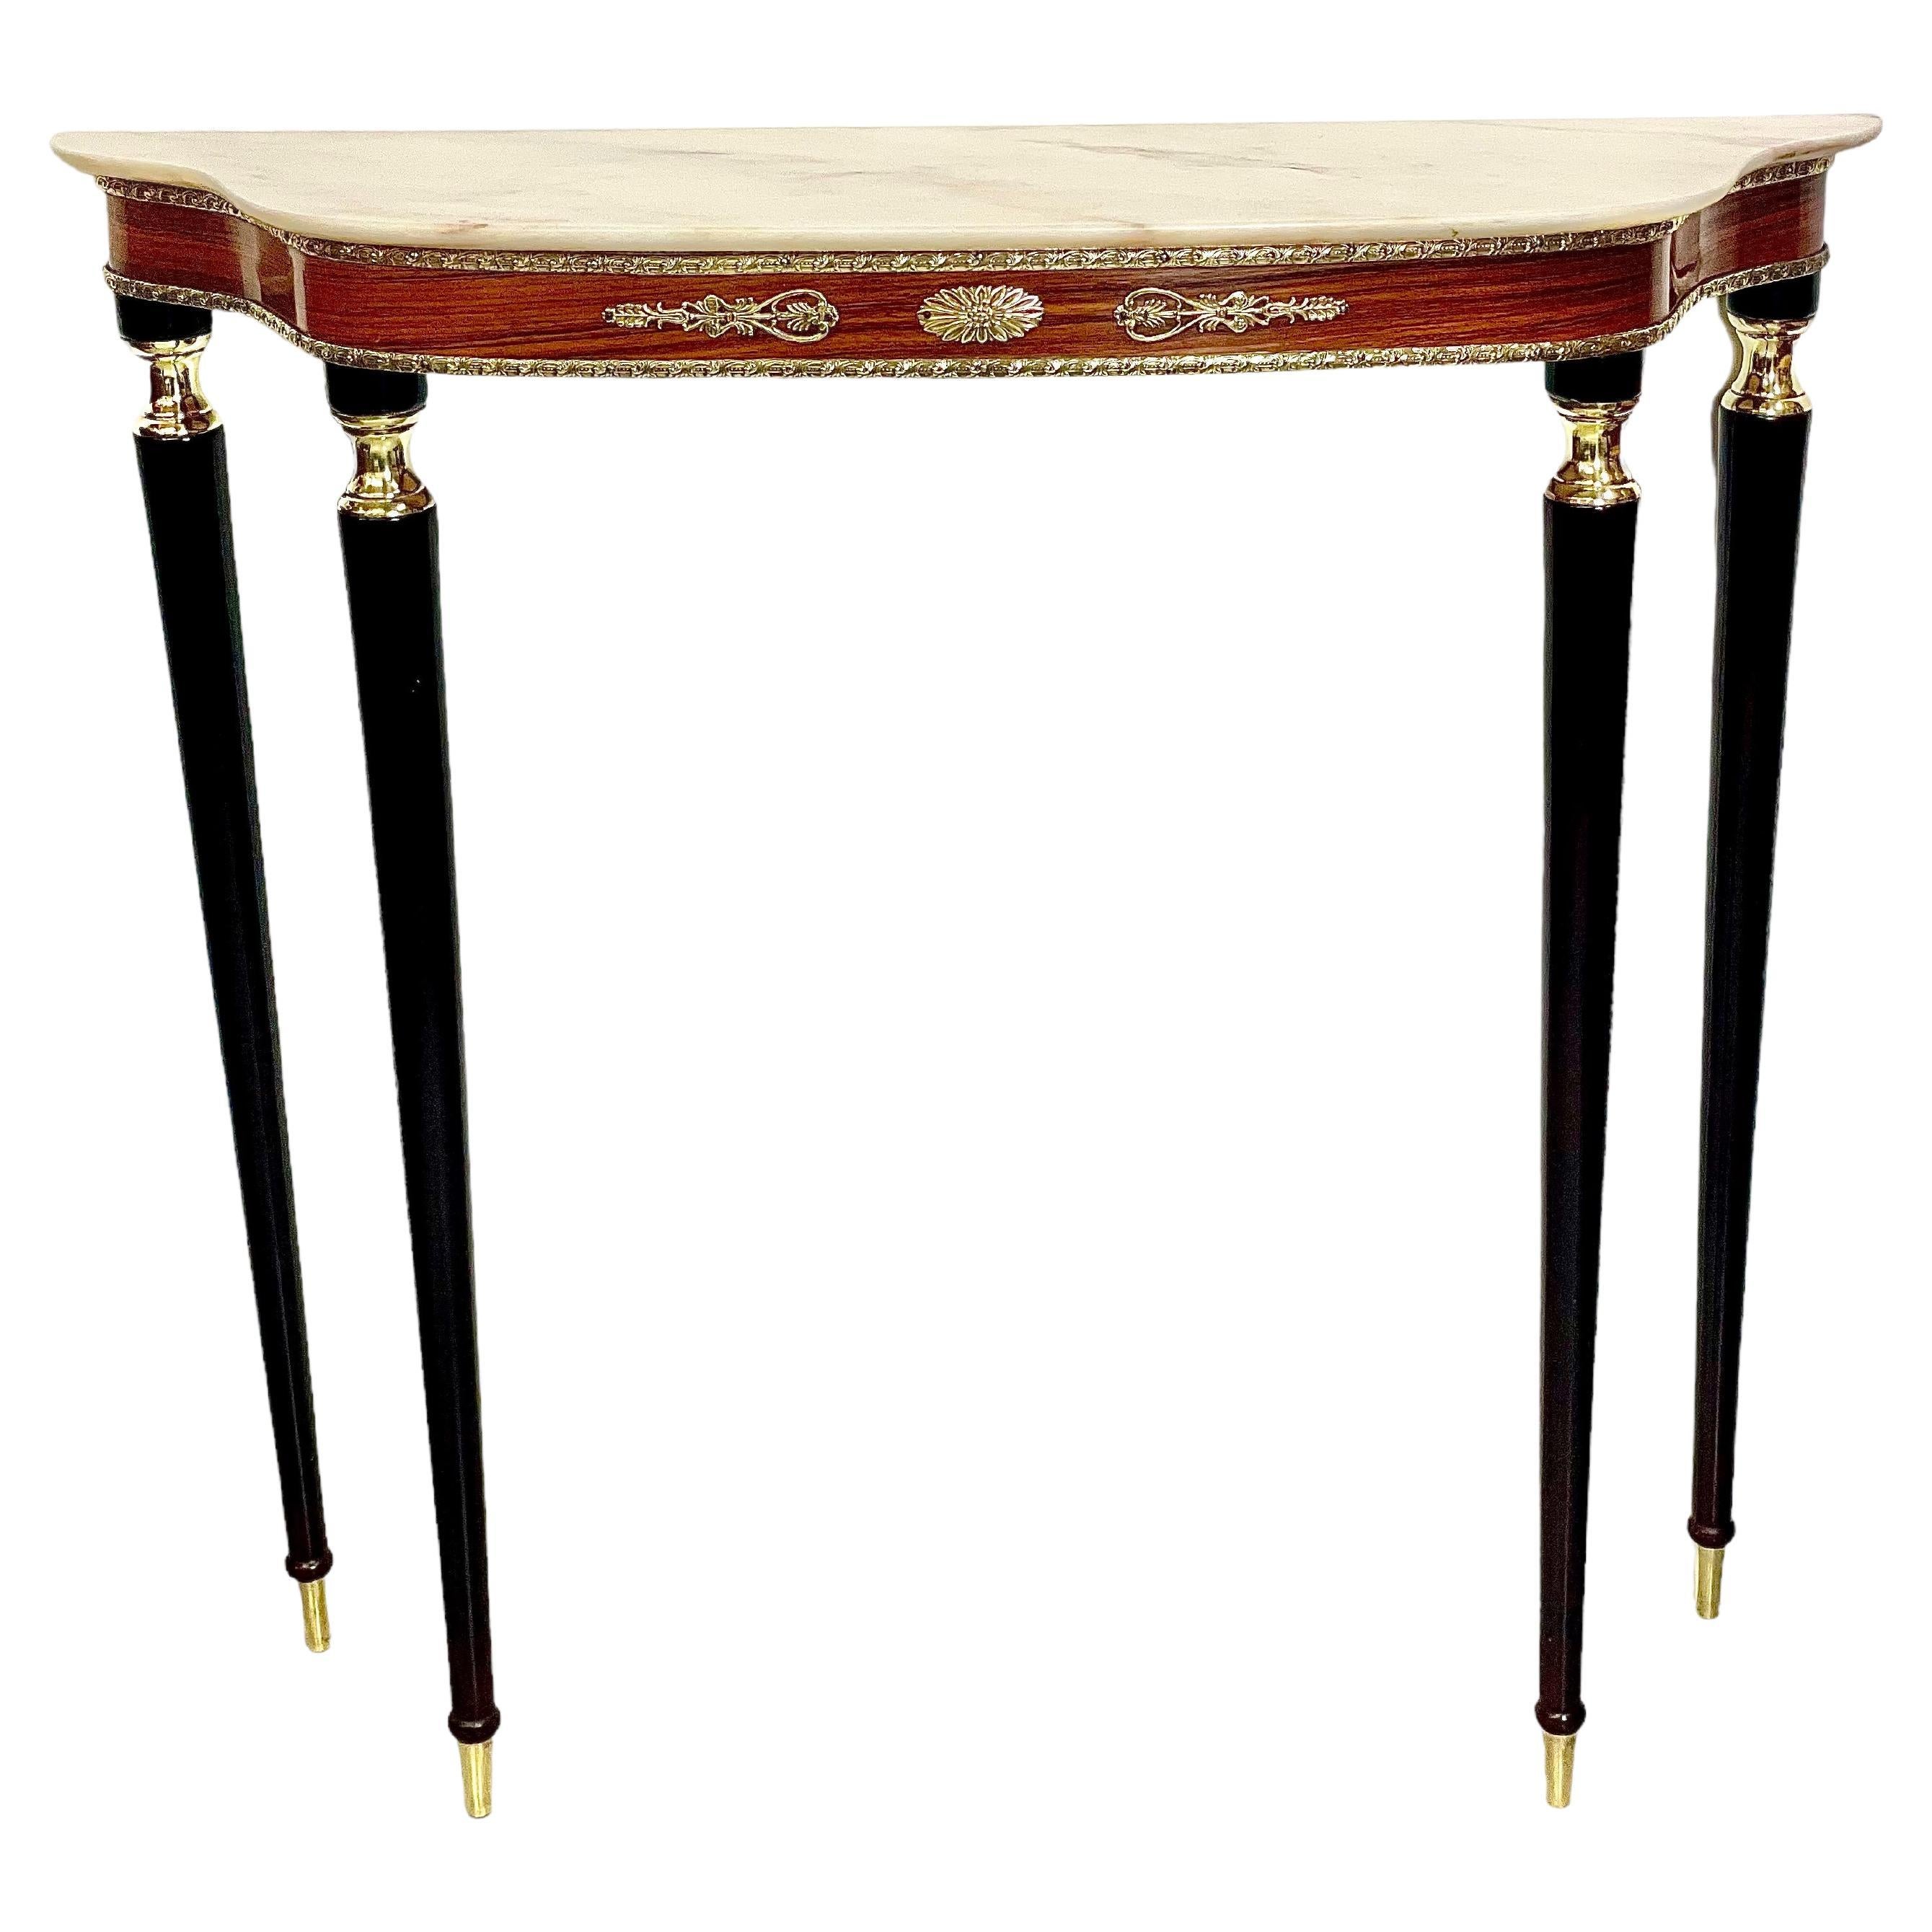 19th Century French Louis XVI Style Console Table with Marble Top